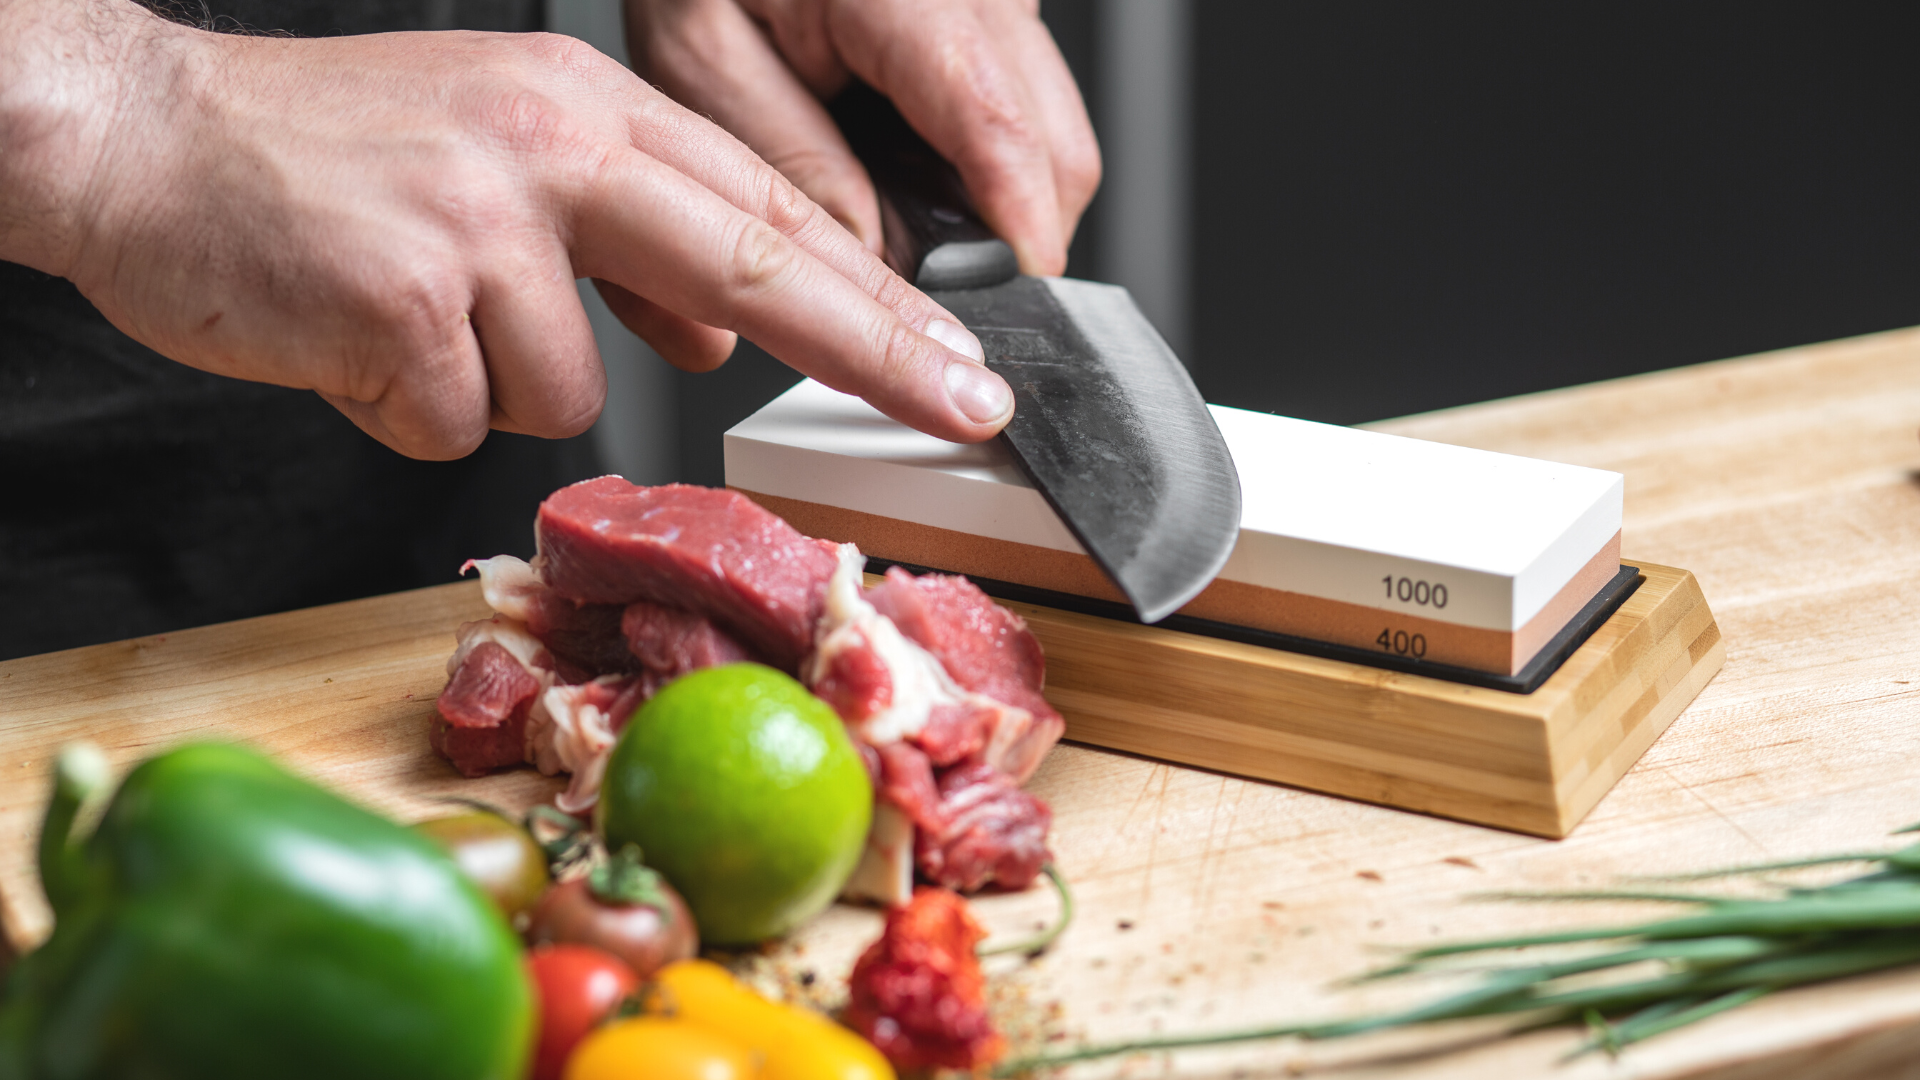 The Angle Matters: How to Sharpen Your Knives for Best Performance